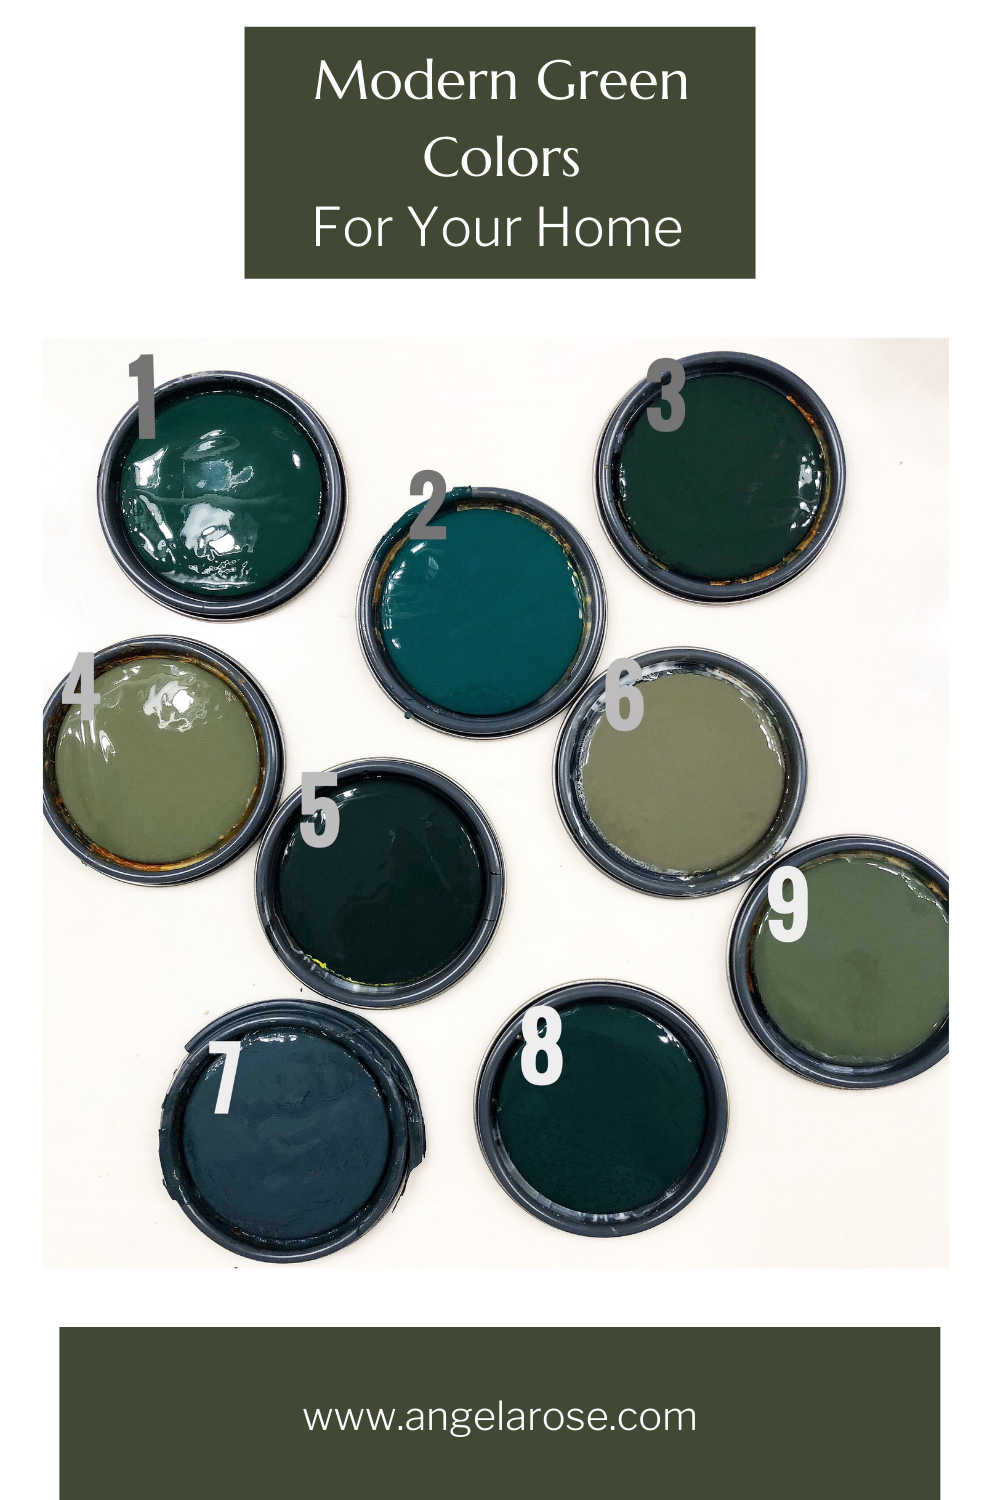 Green Paint Colors  Our Top 12 Must-Haves - construction2style